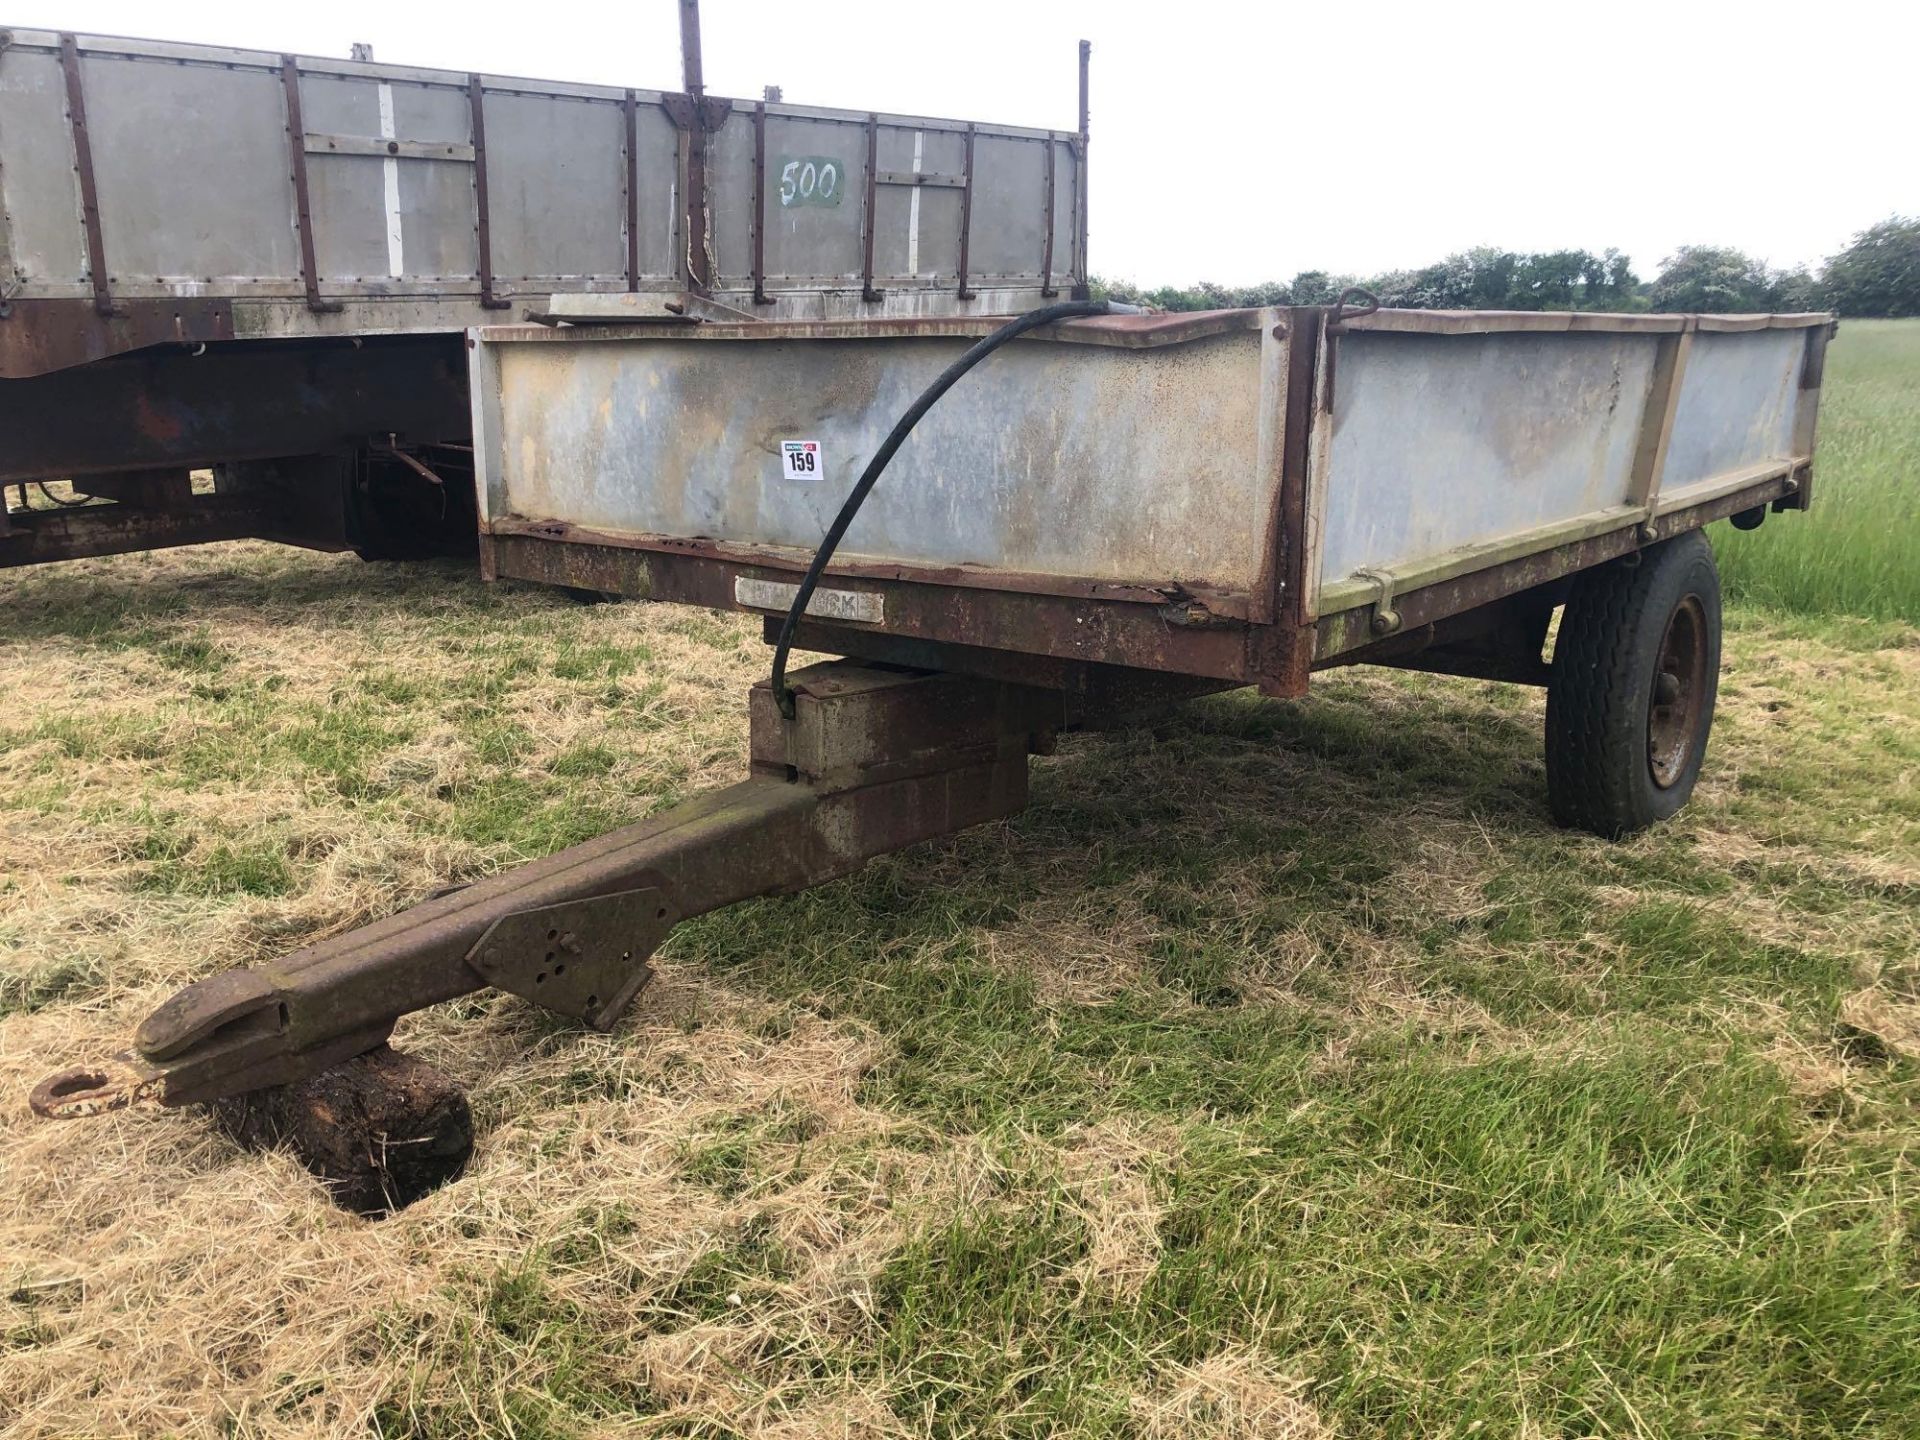 Whitlock 3t galvanised tipping trailer, single axle on 16/8.25-16 wheels and tyres